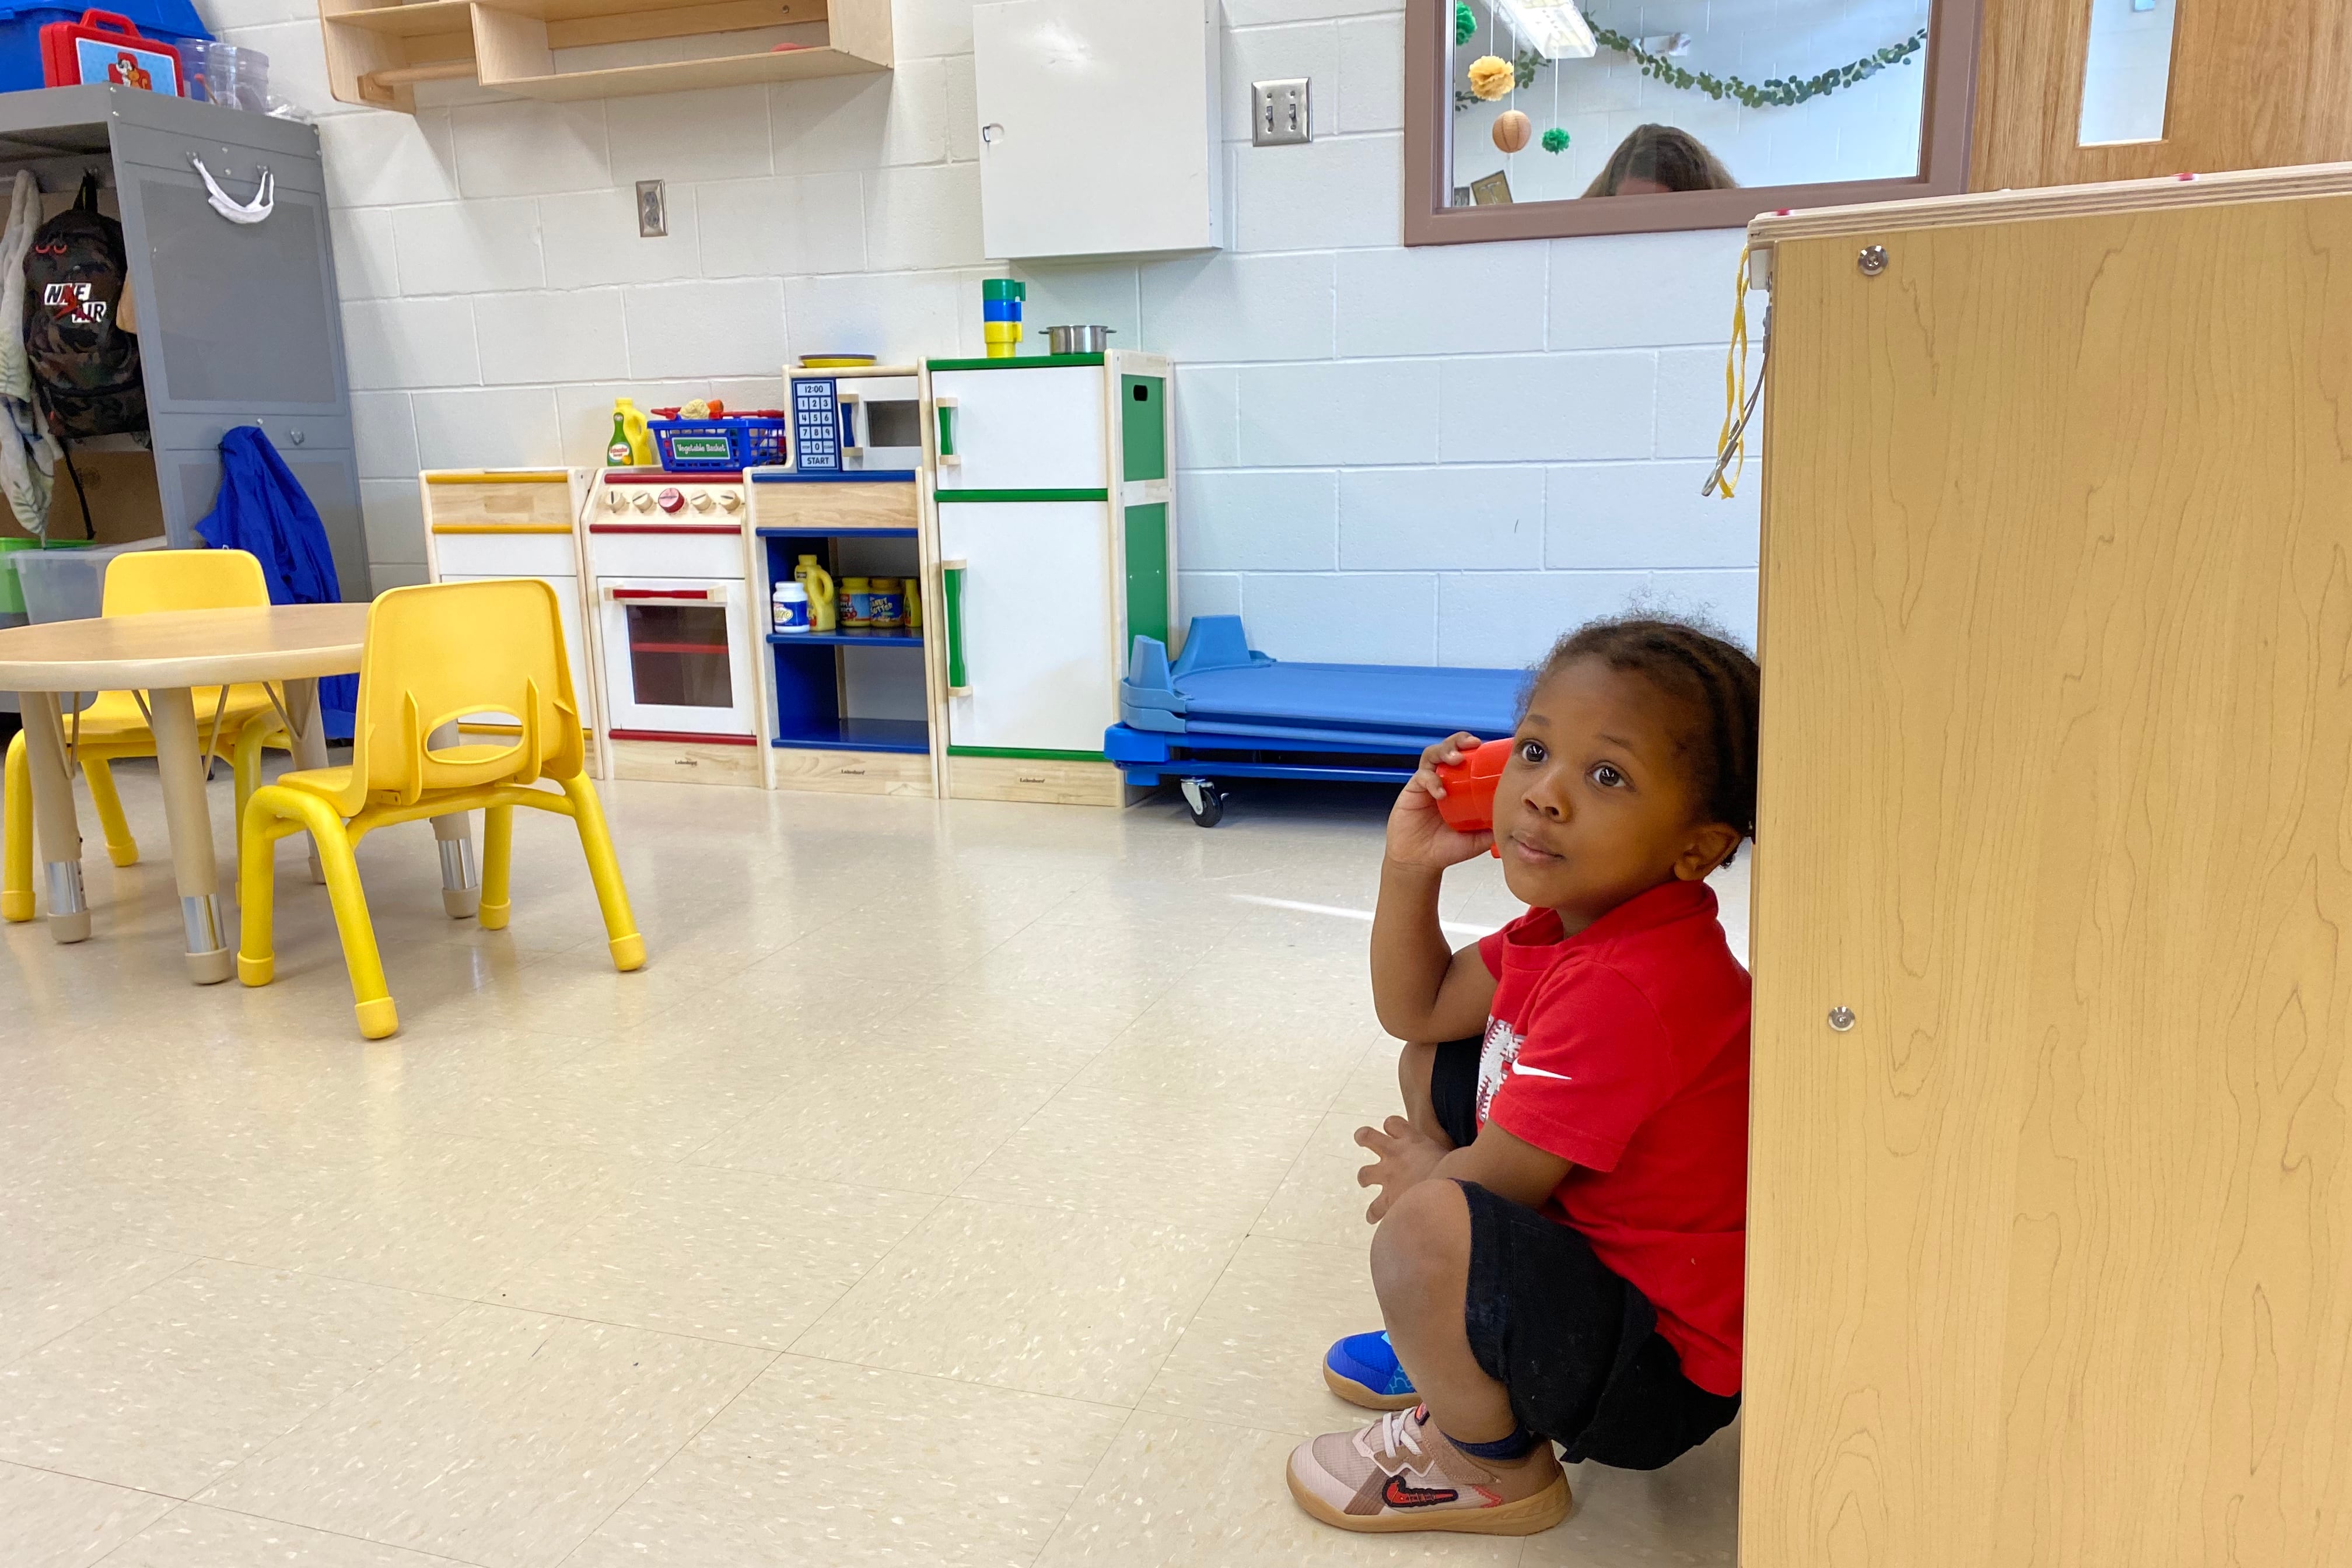 A preschooler wearing a red shirt and two different-colored shoes holds a red cup up to his ear pretending to take a phone order. In the background are a small table and chairs, a play kitchen, and a white board on the wall.